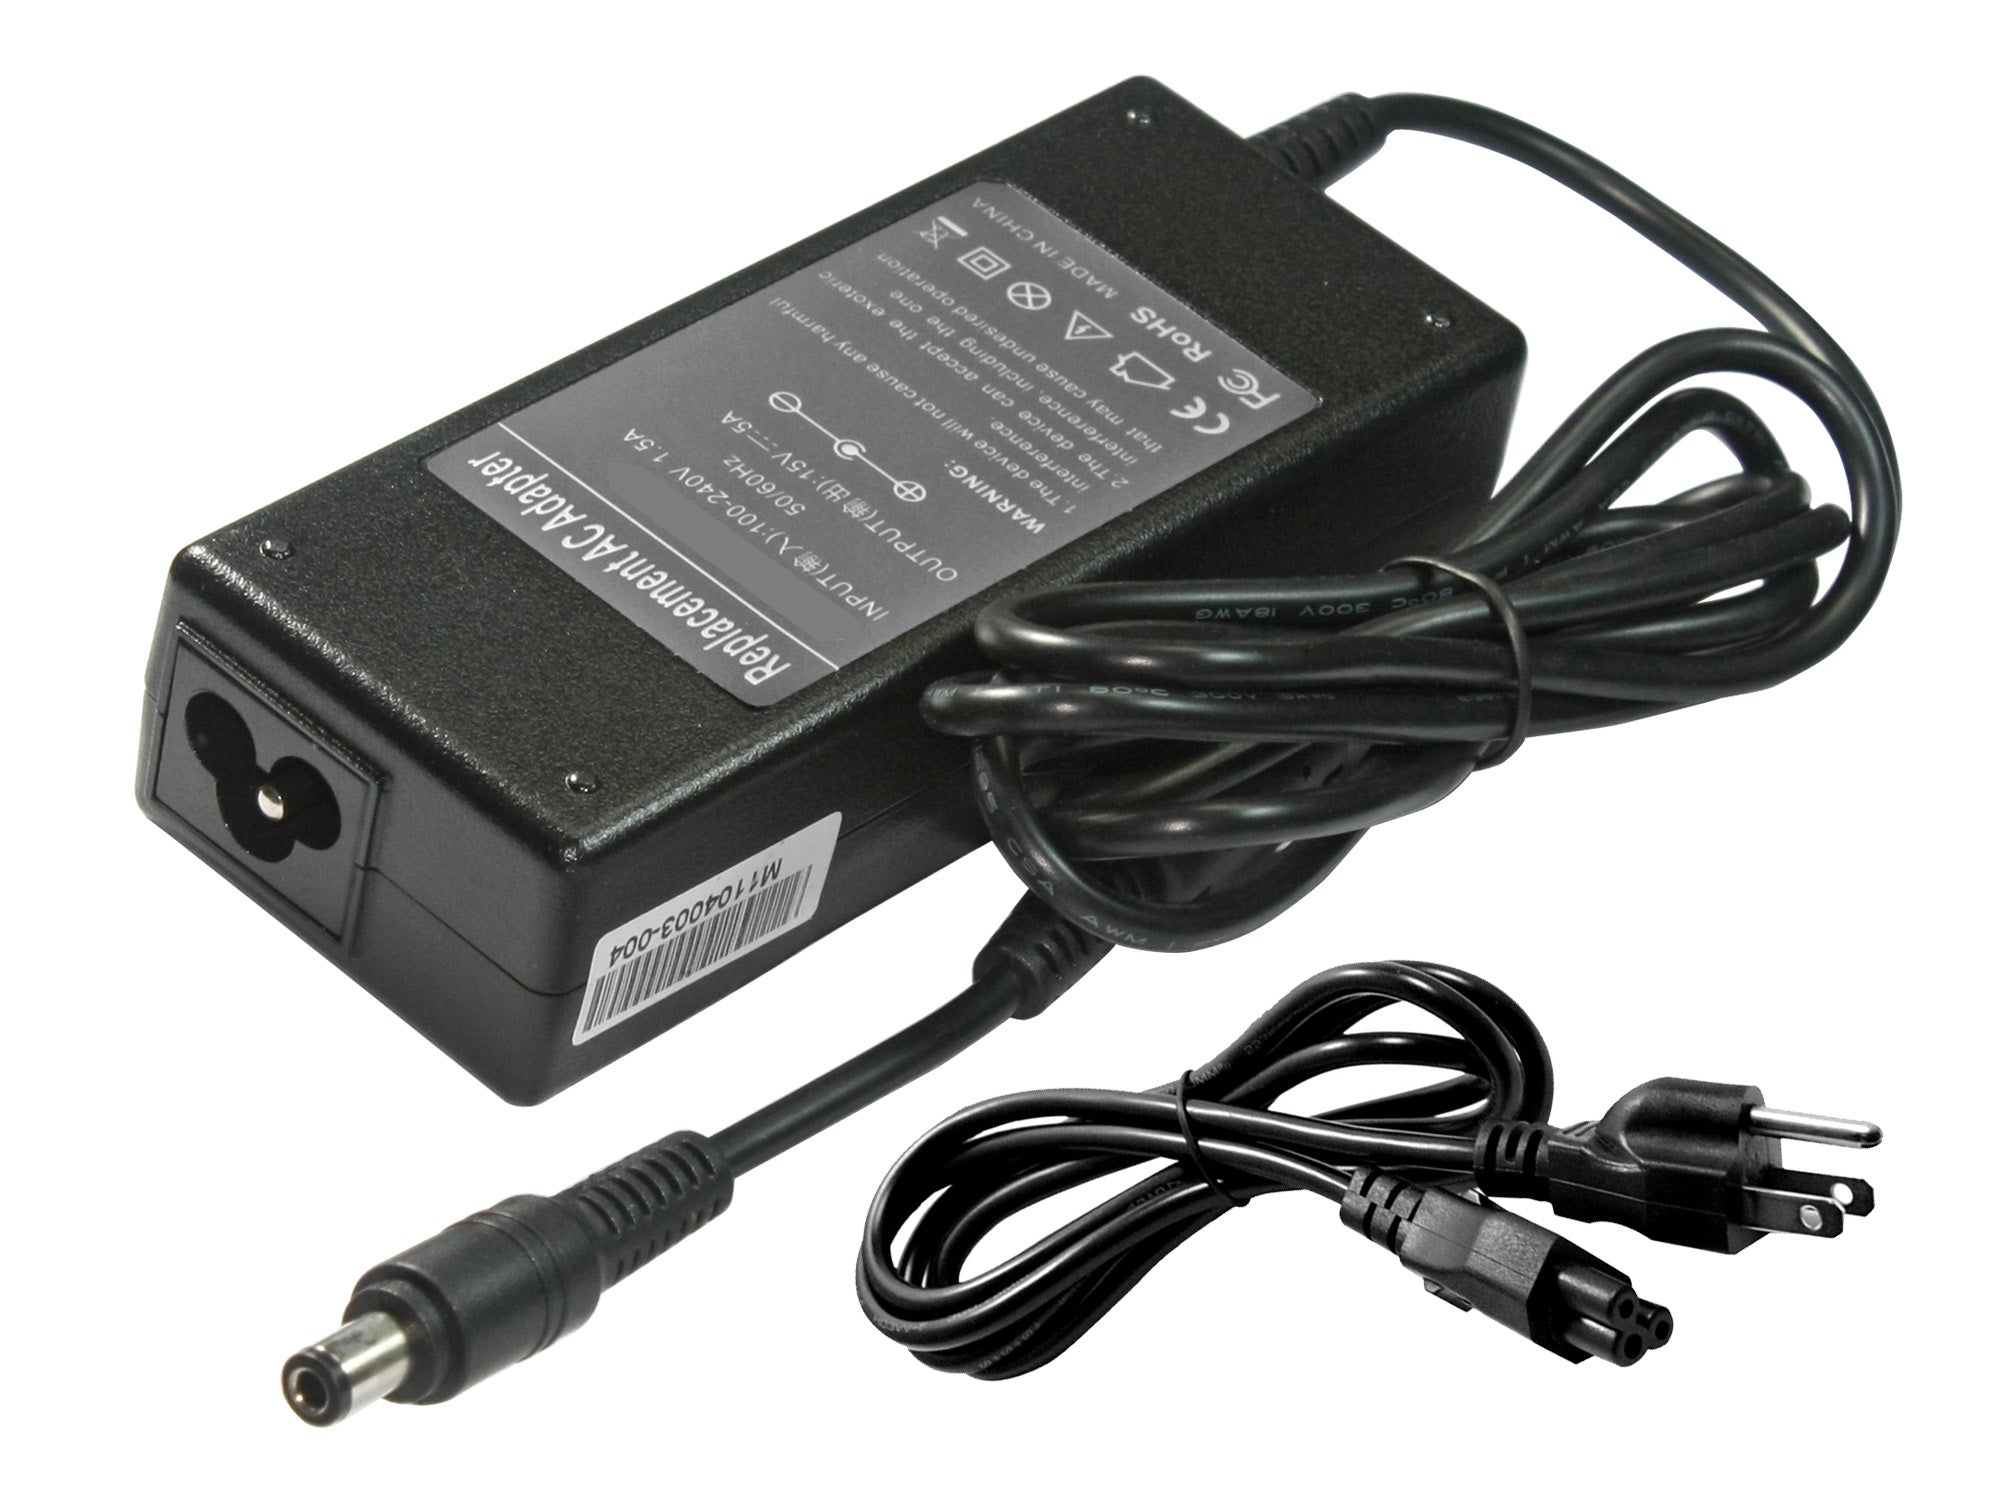 Compatible Replacement Toshiba Satellite A105-S4011 AC Adapter 75Watt 15V 5A.